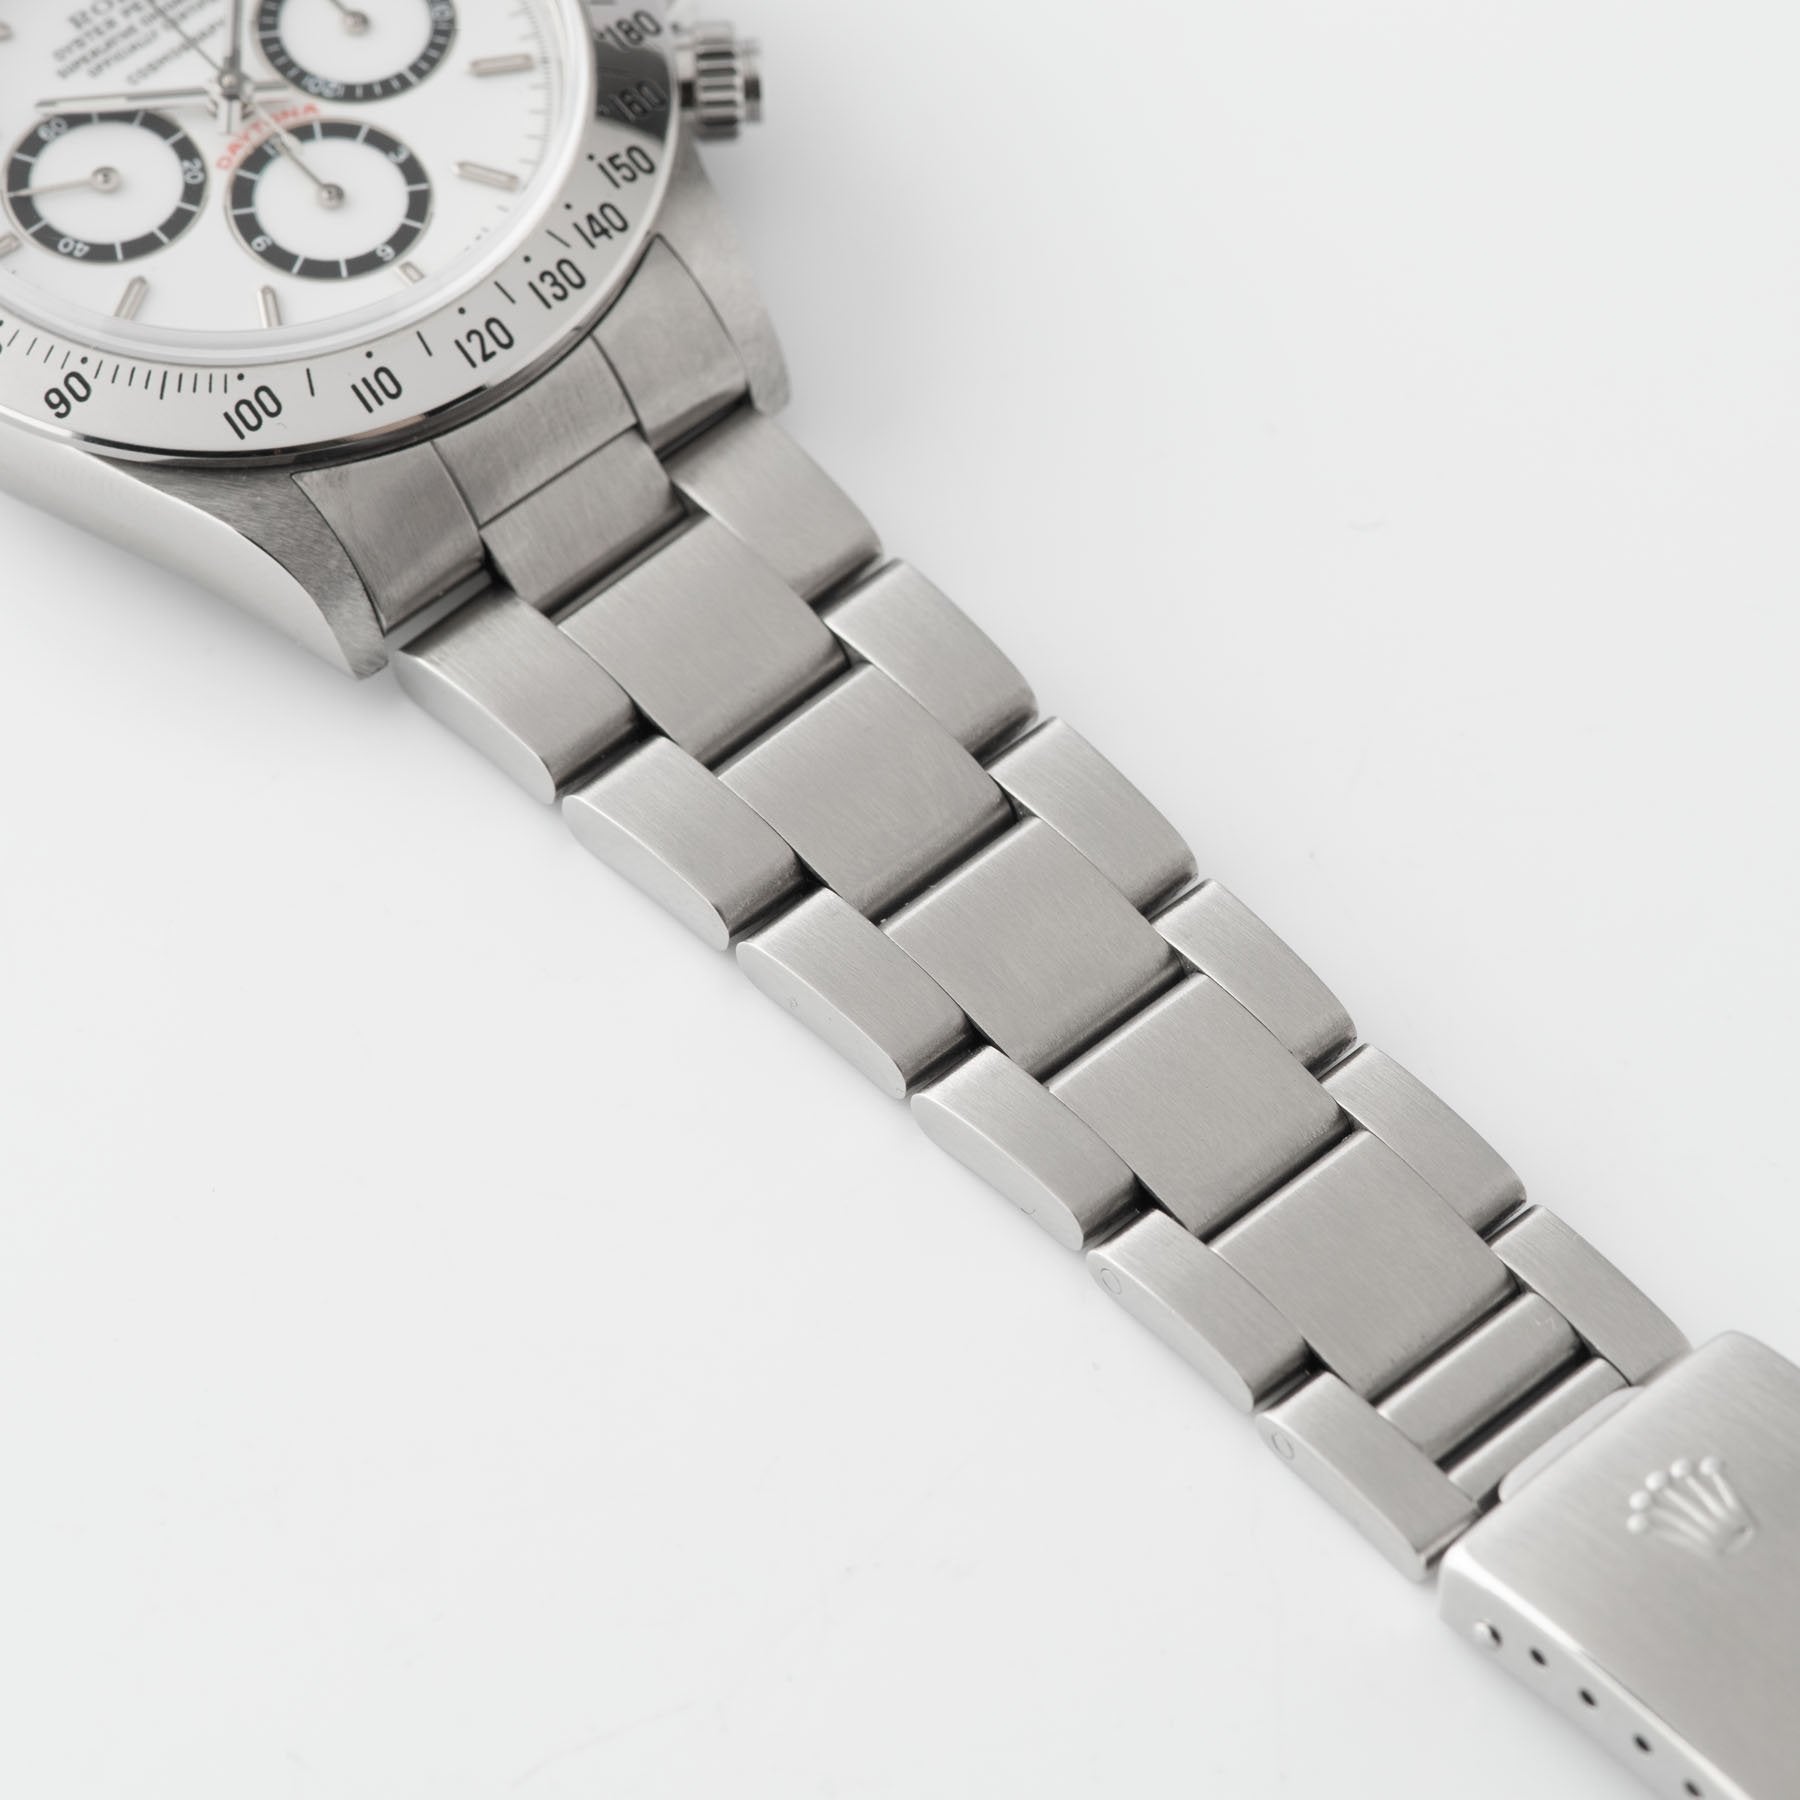 Rolex Daytona Steel 16520 Porcelain Mk1 Dial Box and Papers